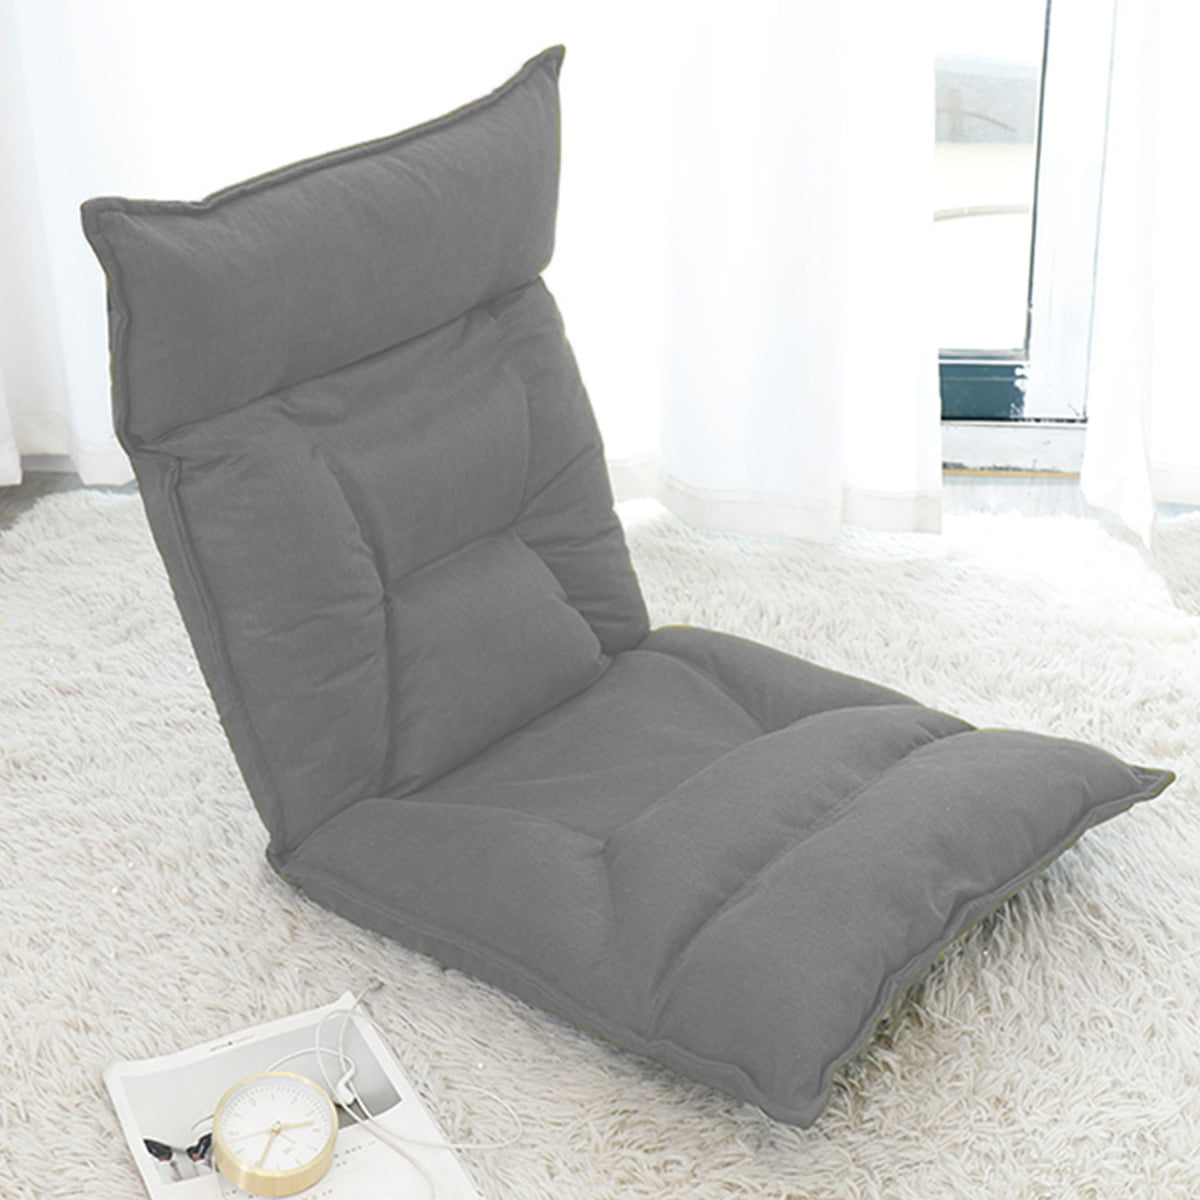 Floor Lounger Adjustable Floor Chair A Picture a Reeds Scene Seoul's Wintertime Memory Foam Folding Floor Sofa Lounge Chair for Adults Home Office Reading Watching Gaming